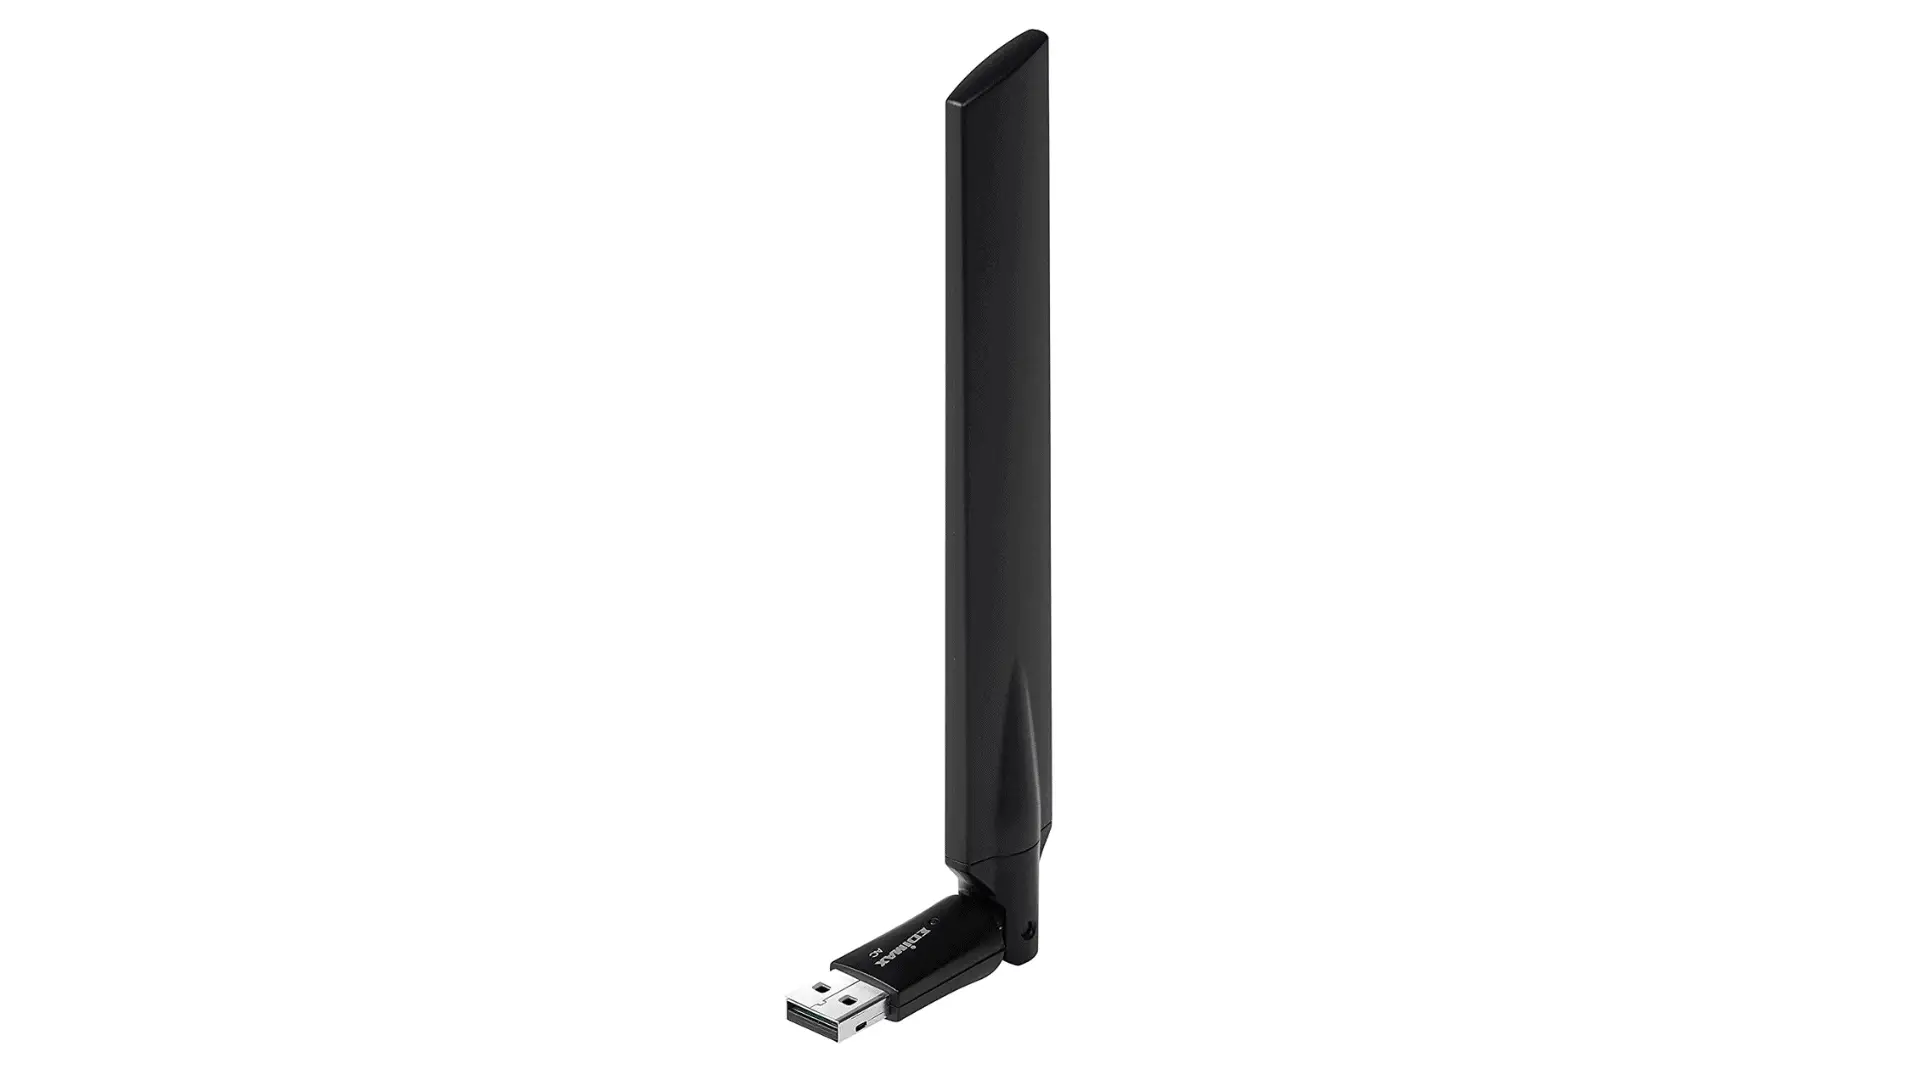 Black EDUP EP-AC1635 USB WiFi Adapter with an attached and adjustable external antenna